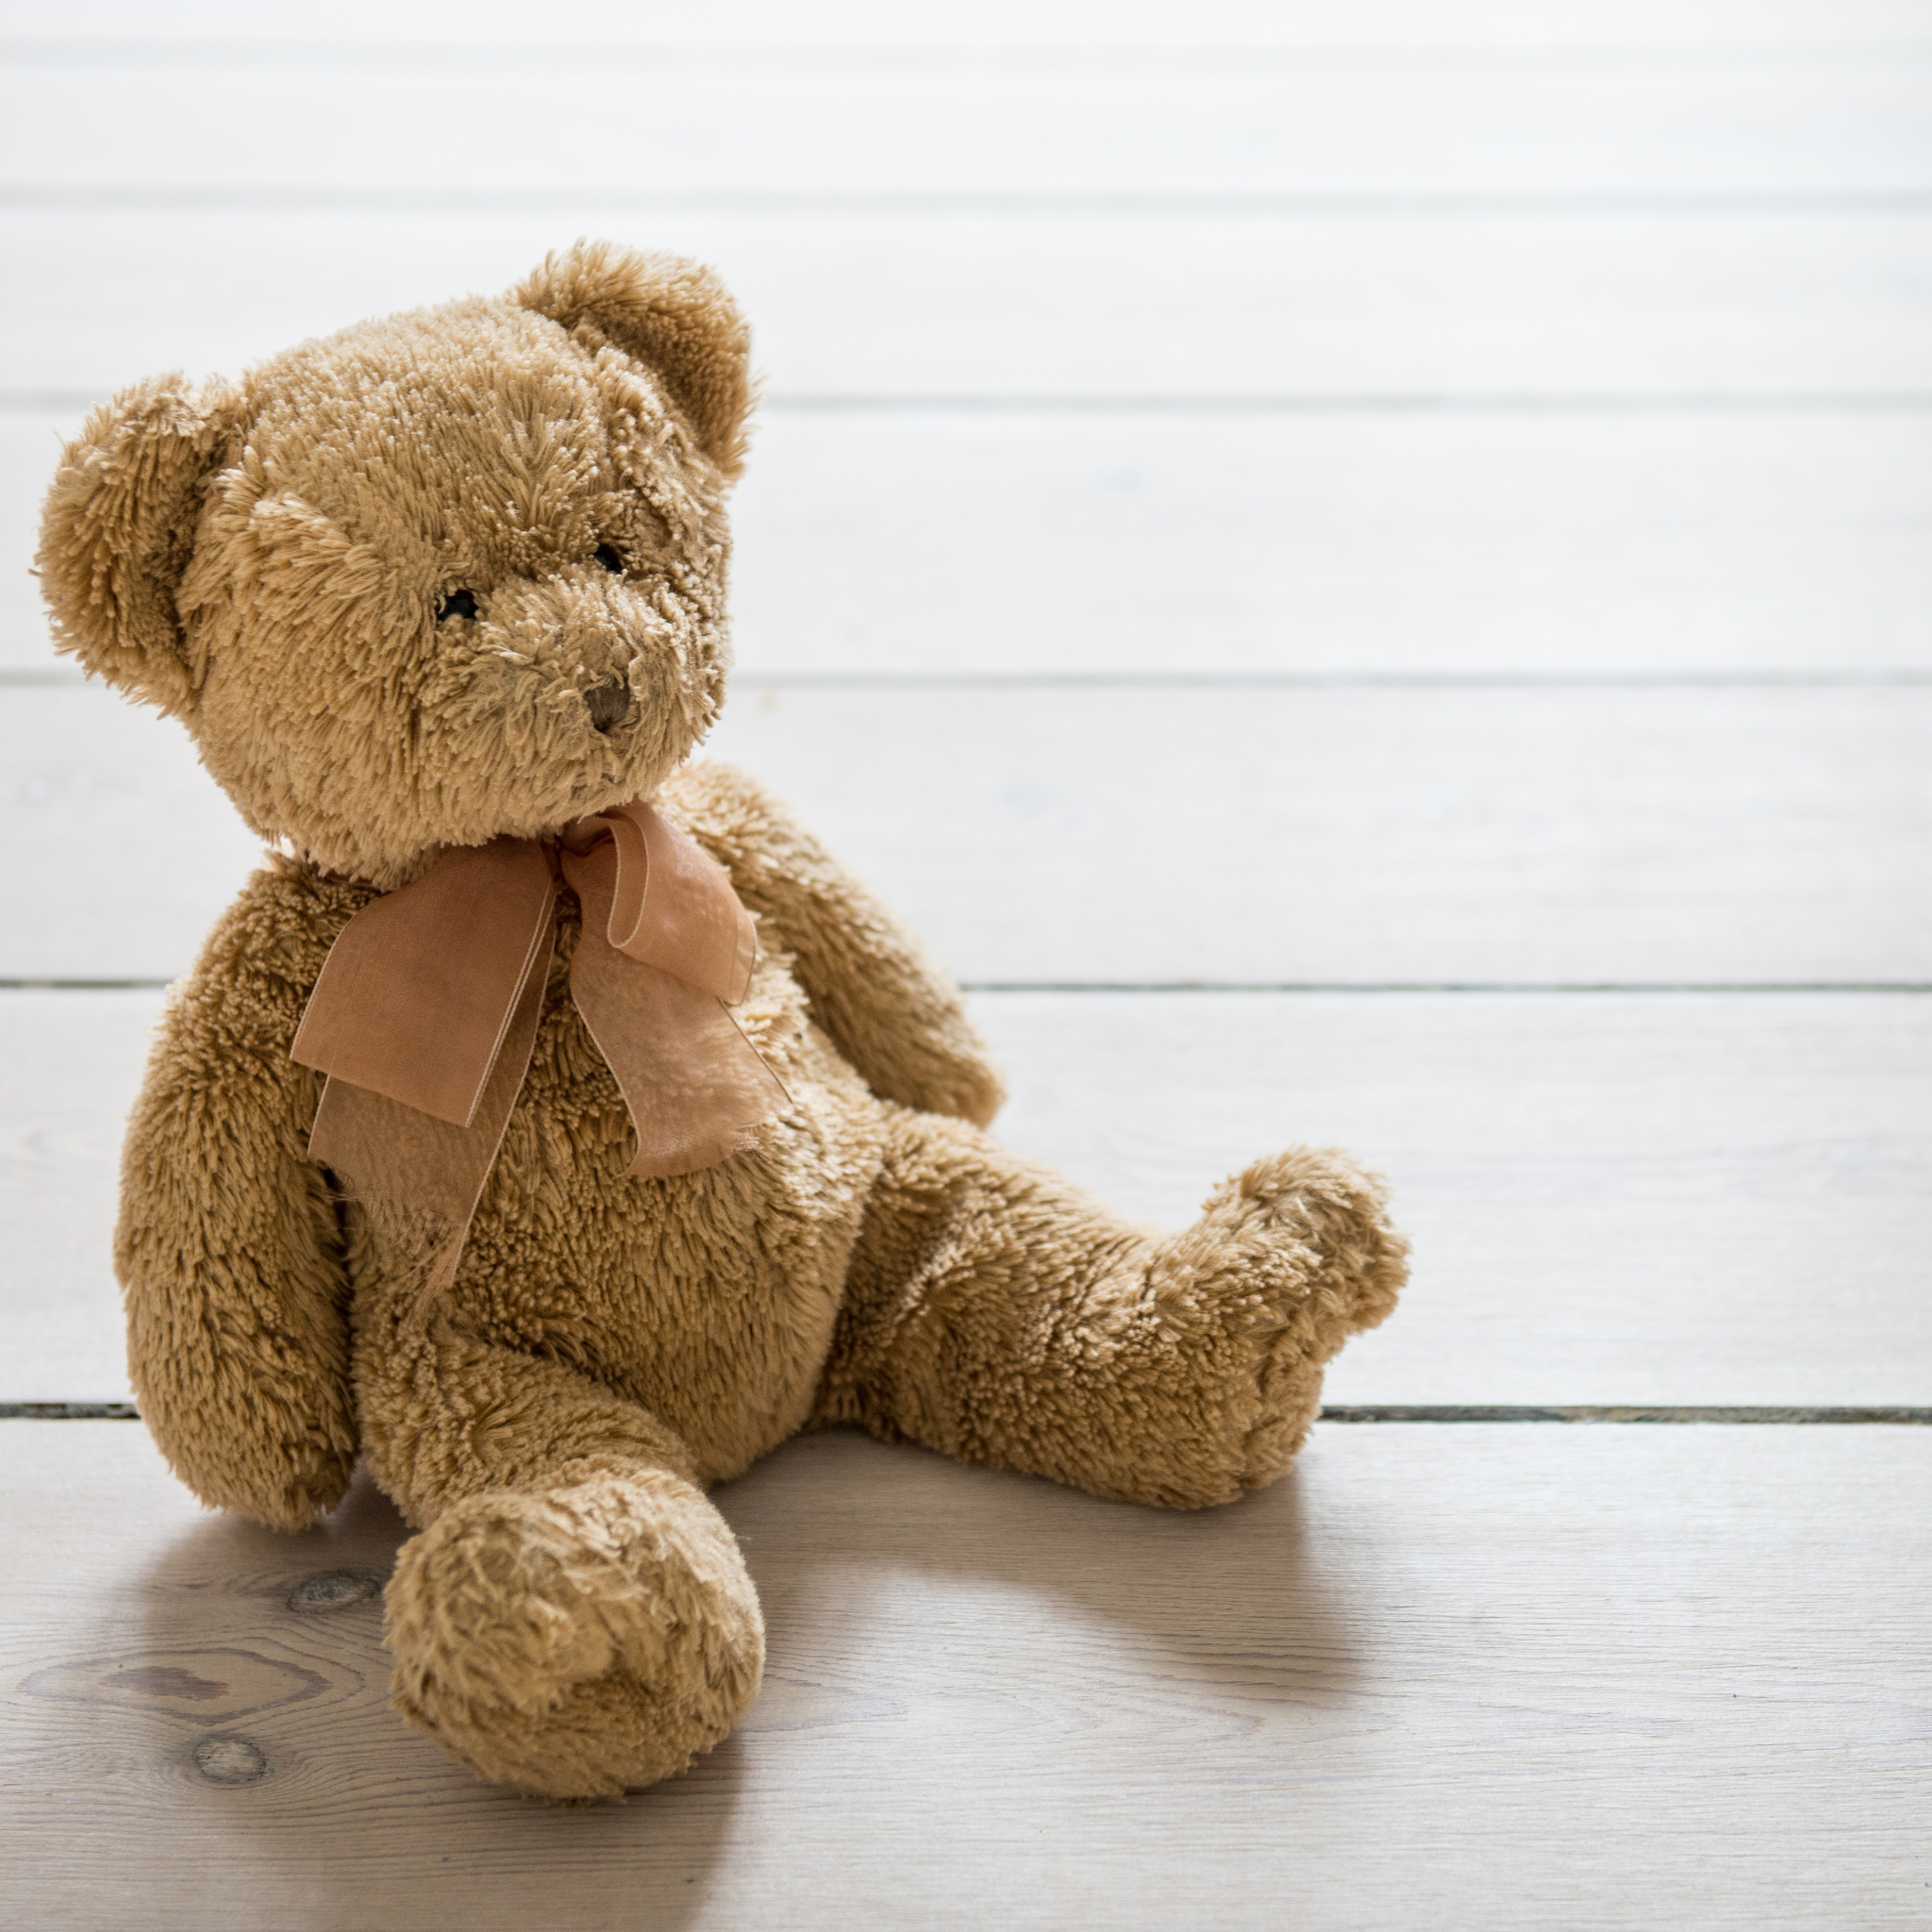 Navigating Grief: Charities Supporting Baby and Infant Loss in the UK